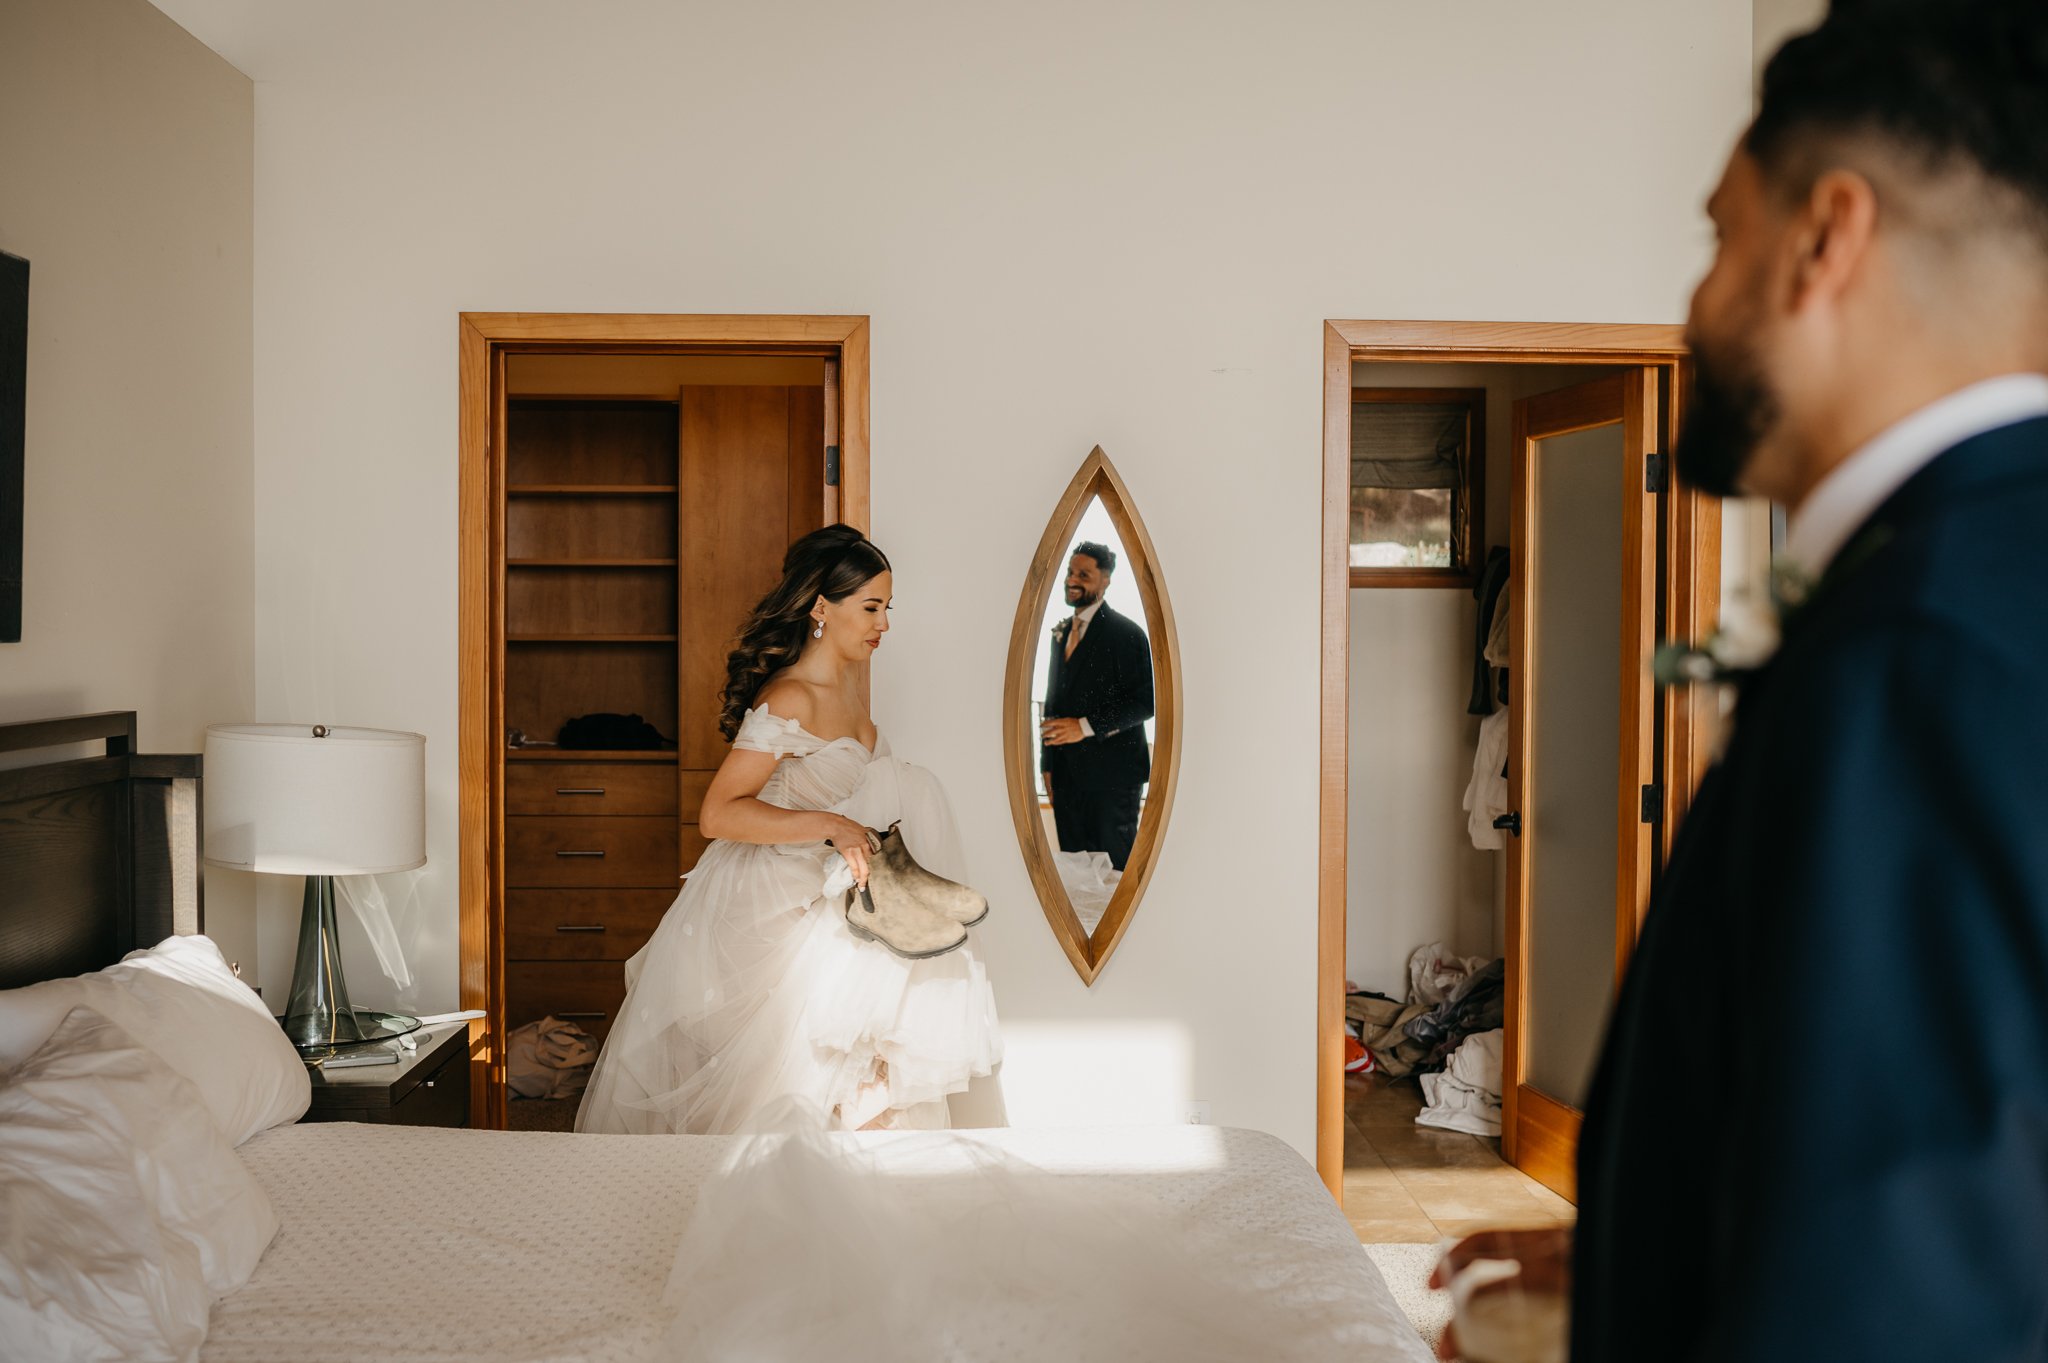 Bride and groom in private room changing shoes with groom's reflection in mirror smiling at bride 